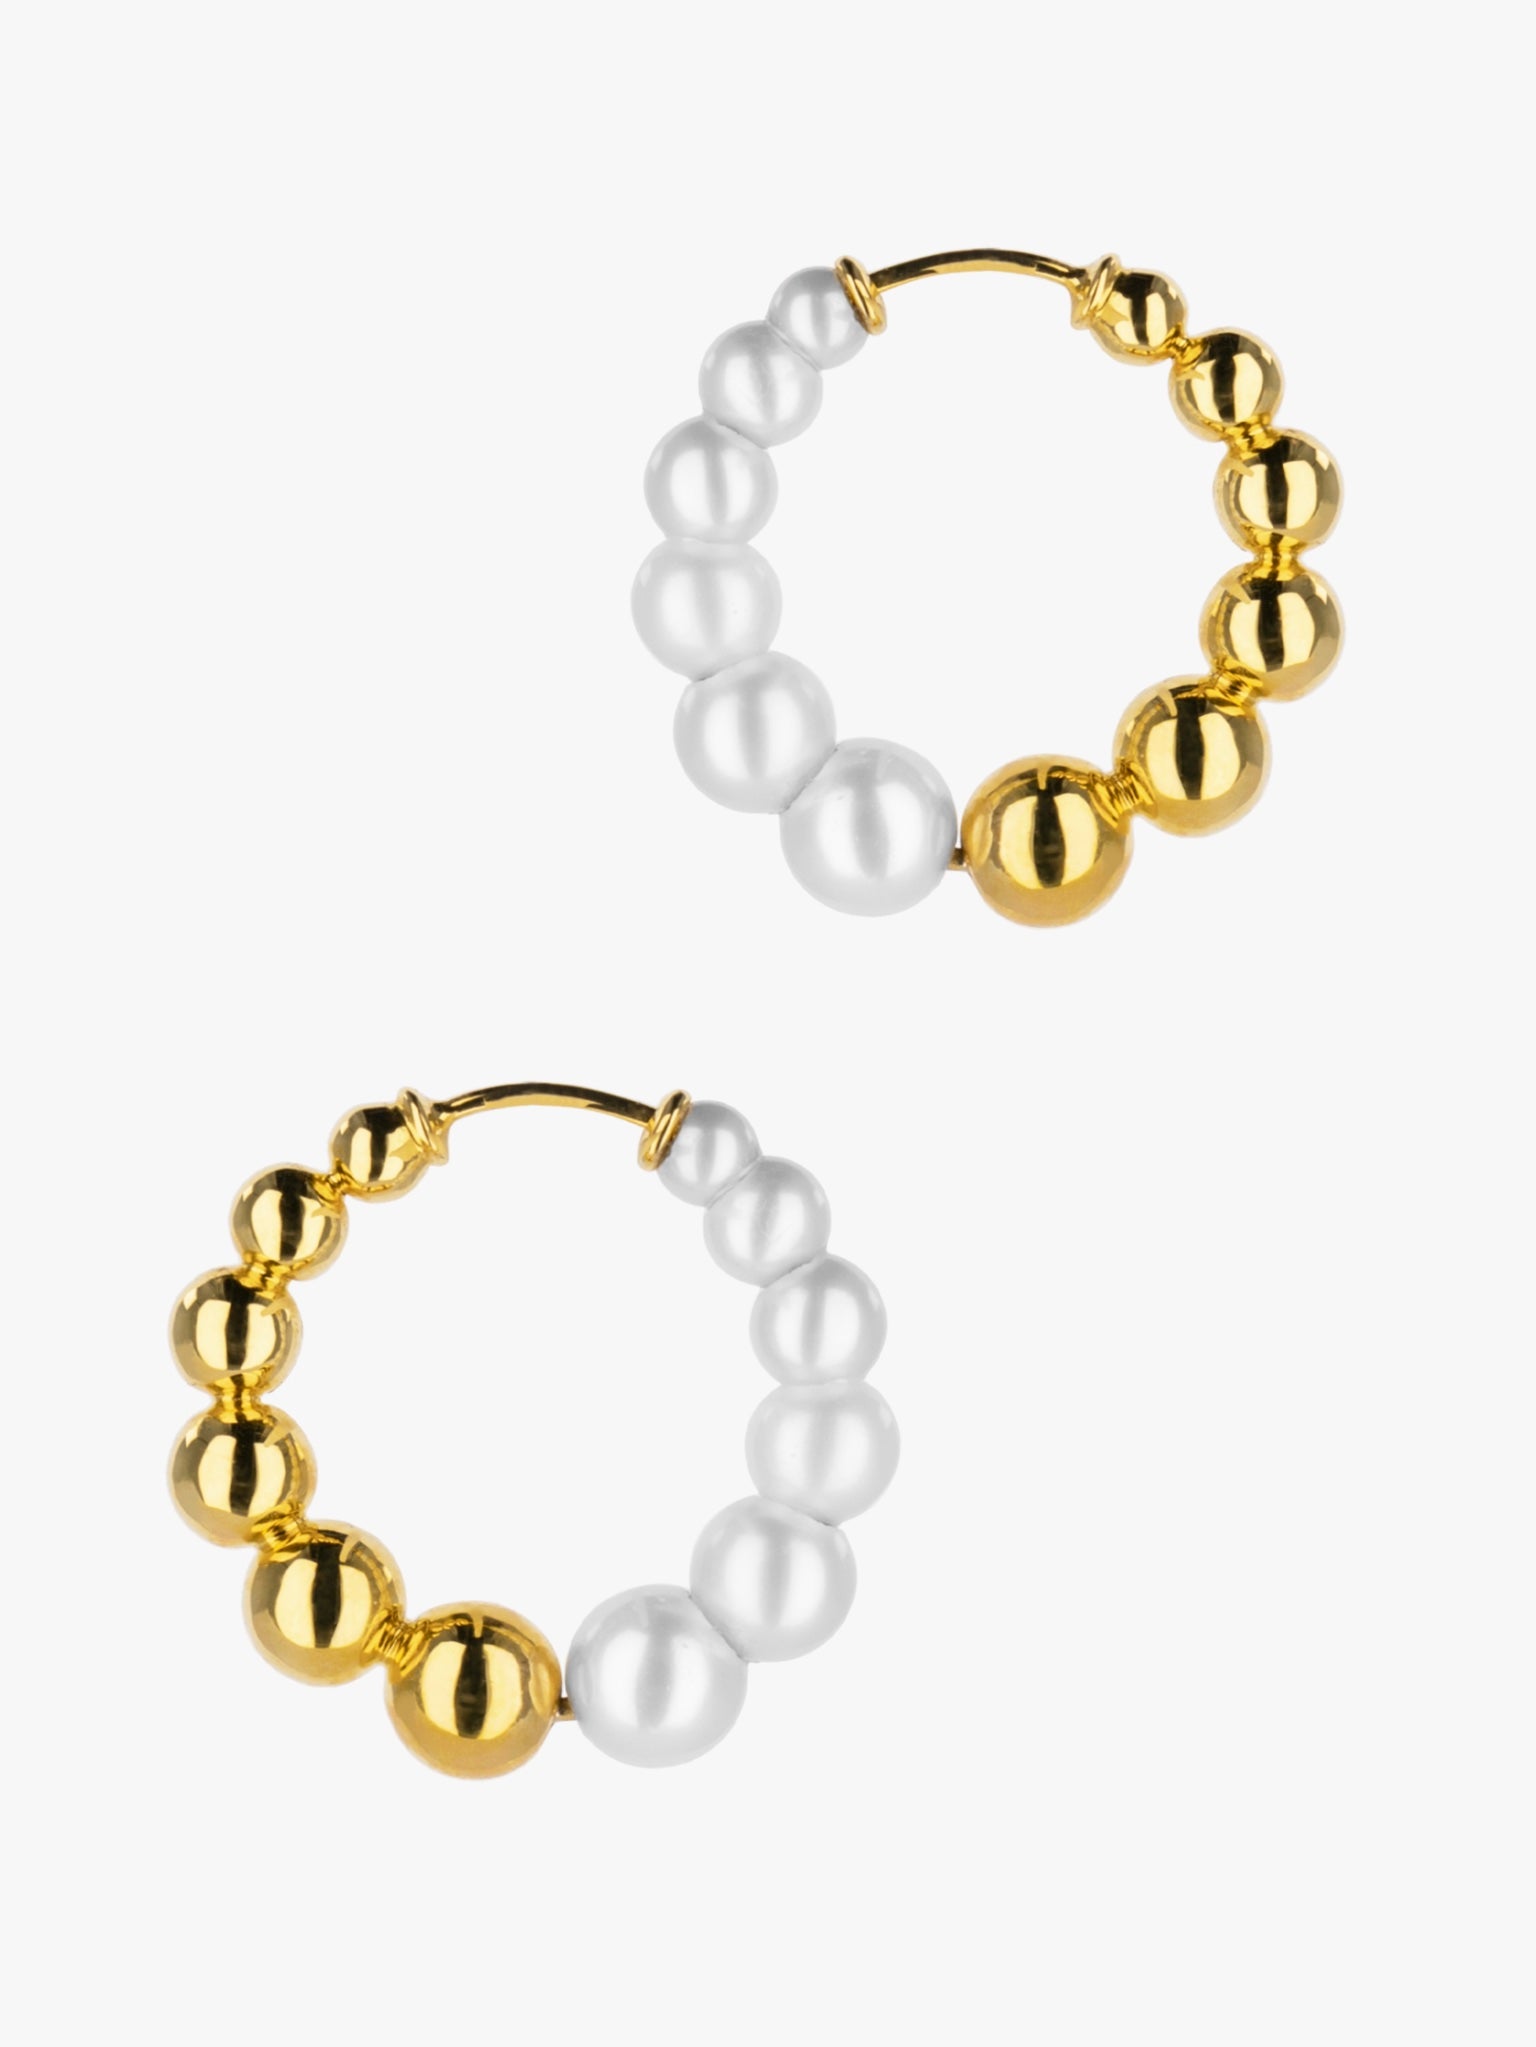 Pearl and gold reversible hoops